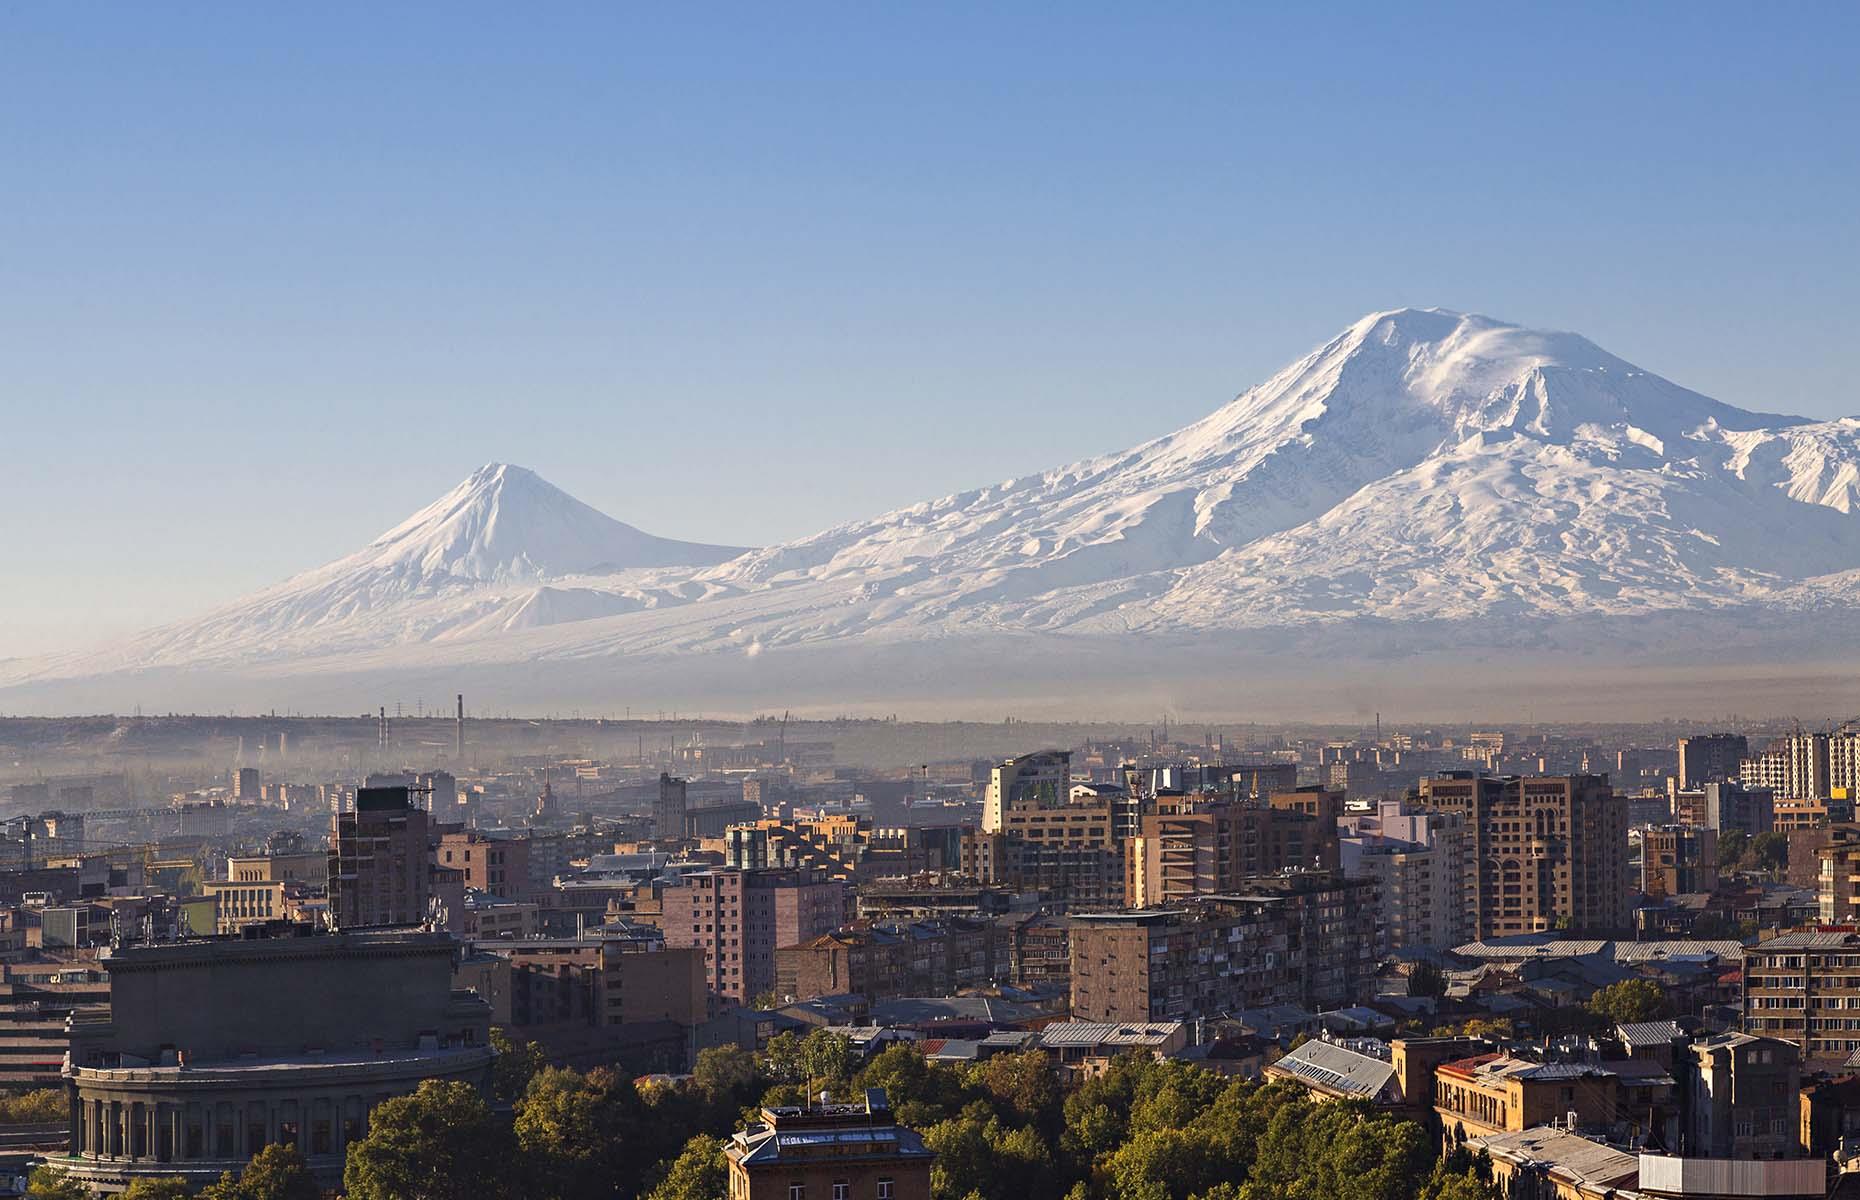 <p>The capital of Armenia is one of Europe's least-known cities and all the more intriguing for it. Its skyline is dominated by Mount Ararat, the symbol of Armenia. Visitors can climb to the top of <a href="https://armenia.travel/en/the-cascade">The Cascade</a> stairway for spectacular city and mountain views or meander through the narrow lanes of the old quarter before seeking out somewhere to try khoravats (traditional barbecued meat). A harrowing but important visit is <a href="http://www.genocide-museum.am/eng/index.php">The Armenian Genocide Museum</a> and its moving memorial.</p>